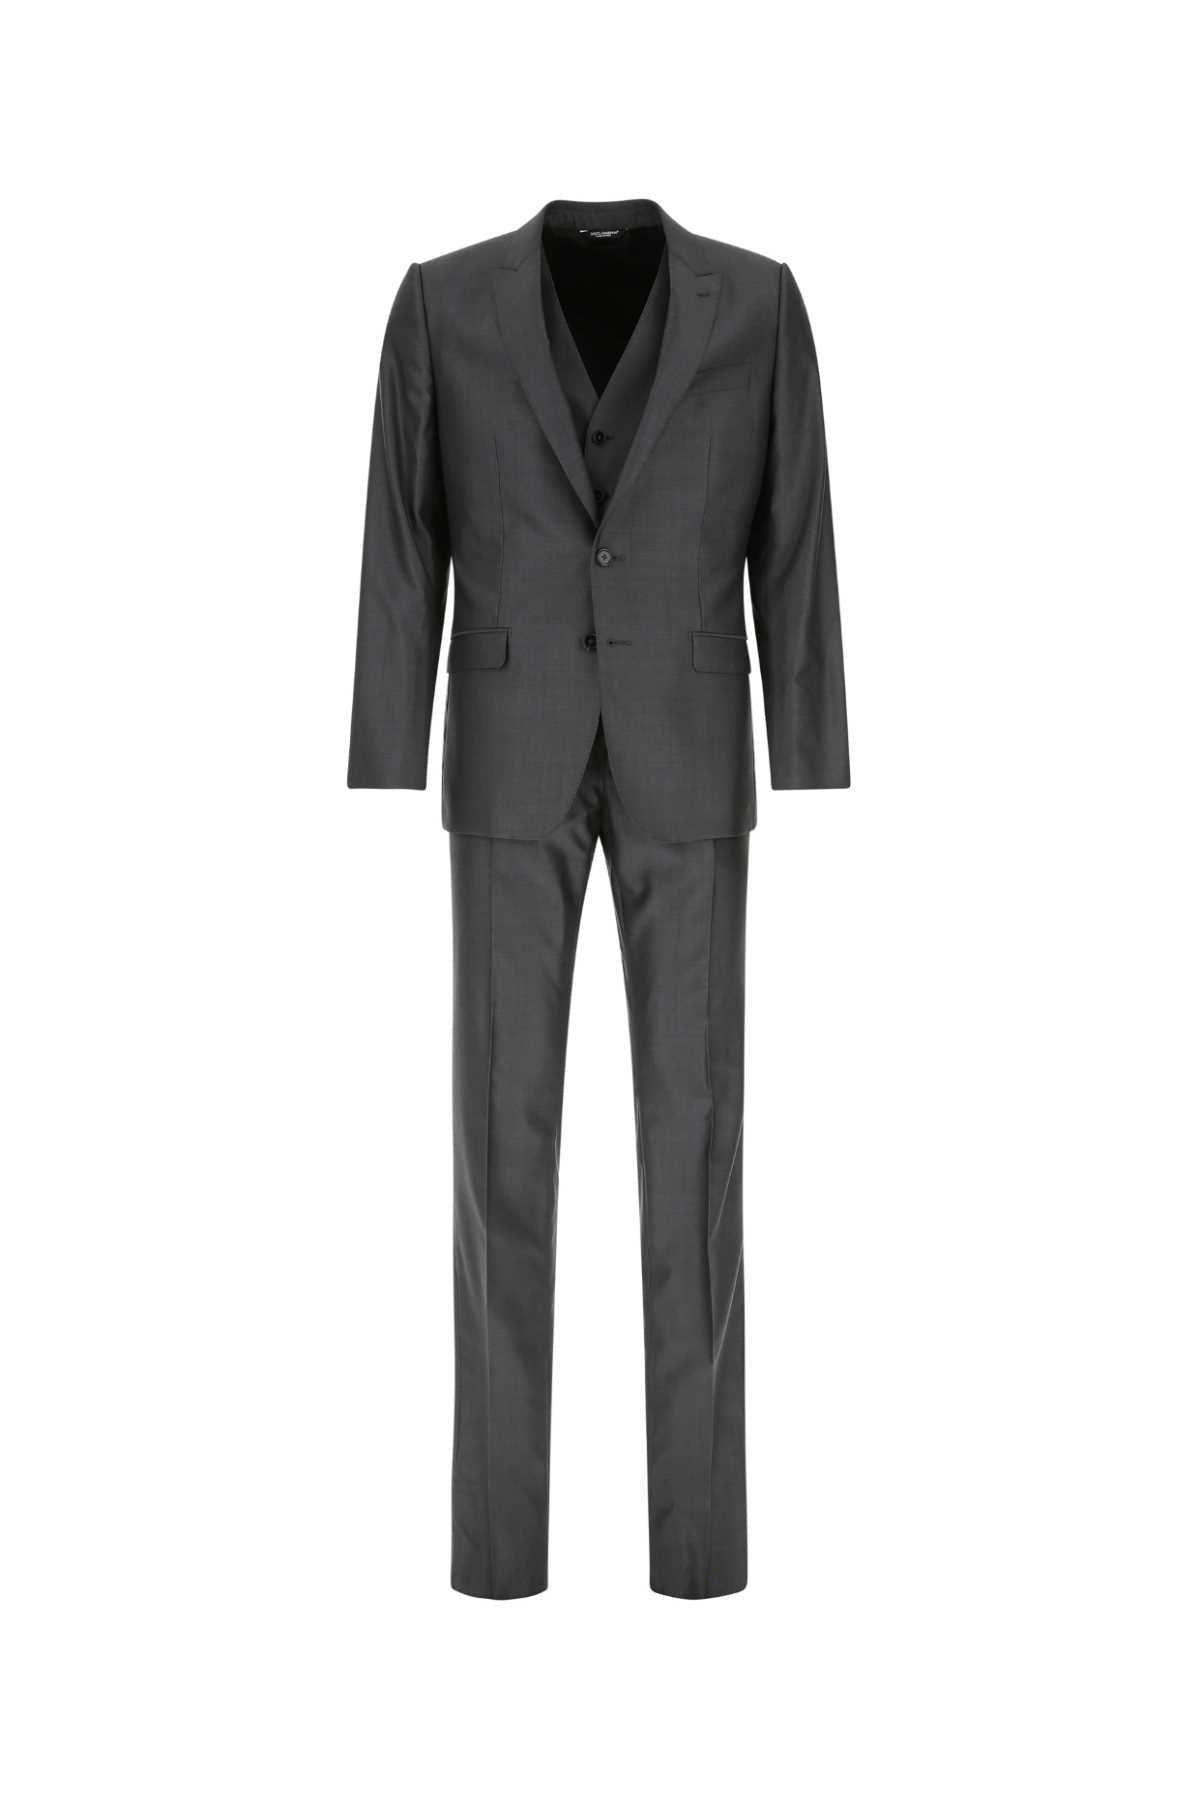 dolce & gabbana martini-fit tailored suit